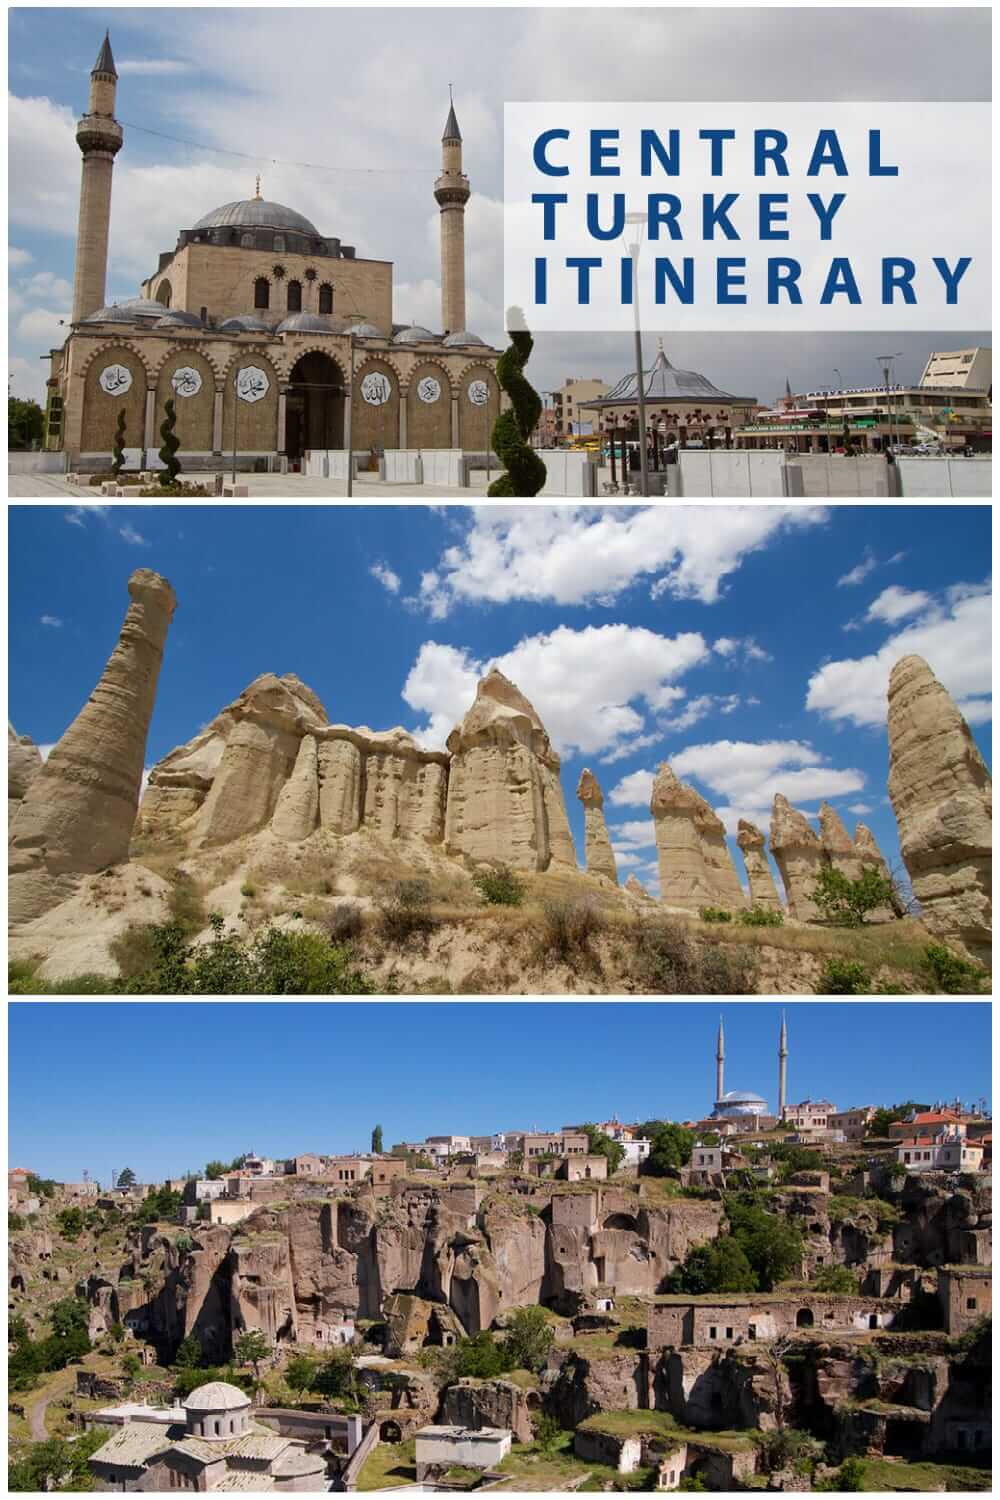 Central Turkey itinerary from Antalya to Ankara for backpackers and independent travellers #travel #backpacking #travelplanning #europe #turkey